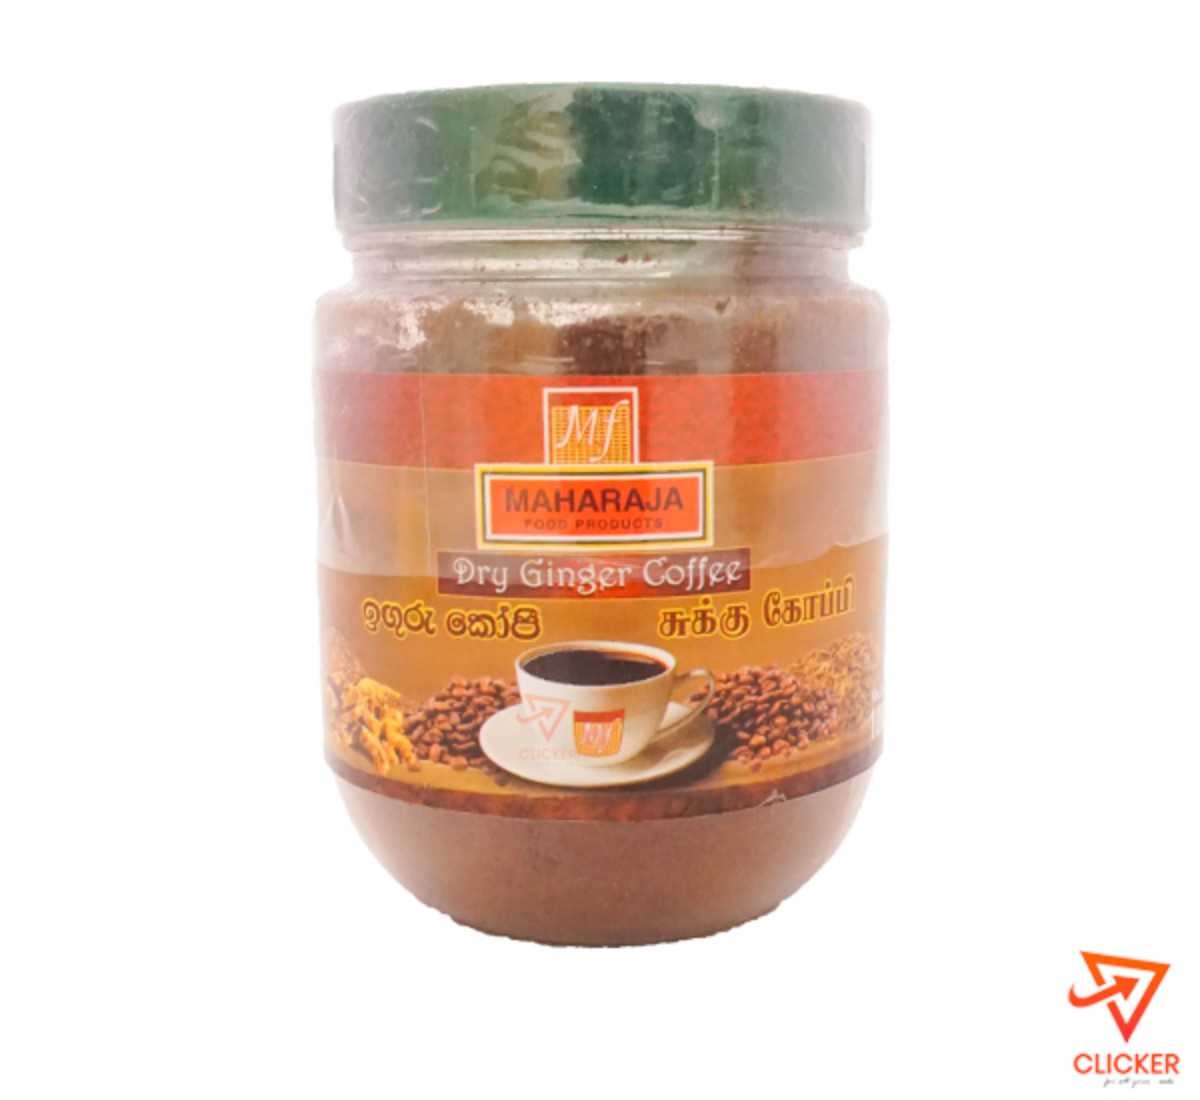 Clicker product 100g MAHARAJA  dry ginger coffee 981